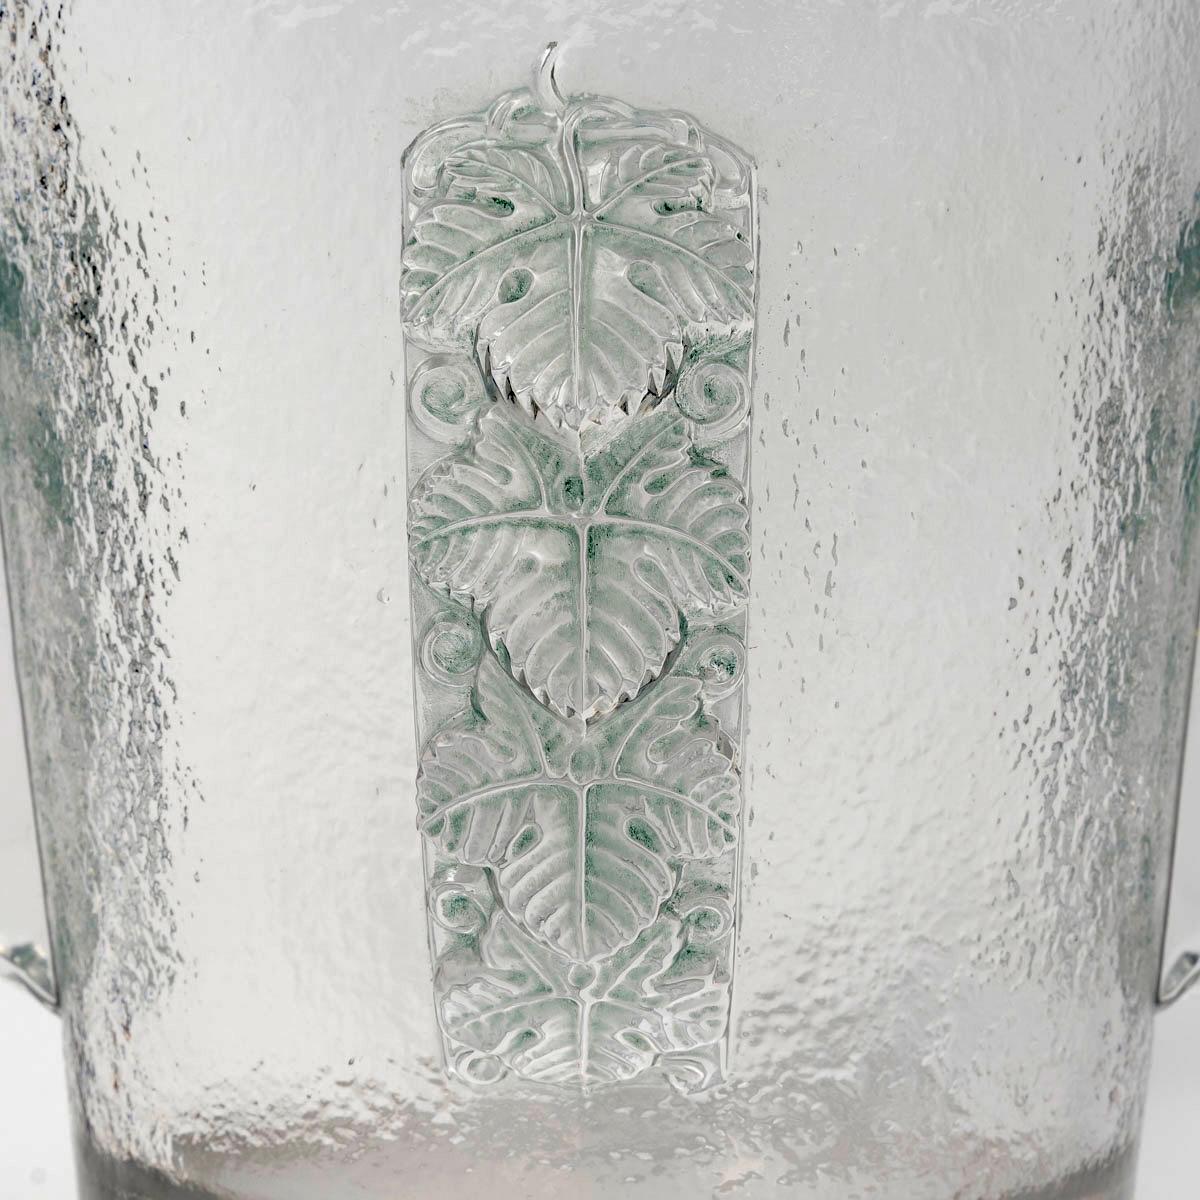 Art Deco 1938 René Lalique Ice Bucket Vase Epernay Frosted Glass with Green Patina